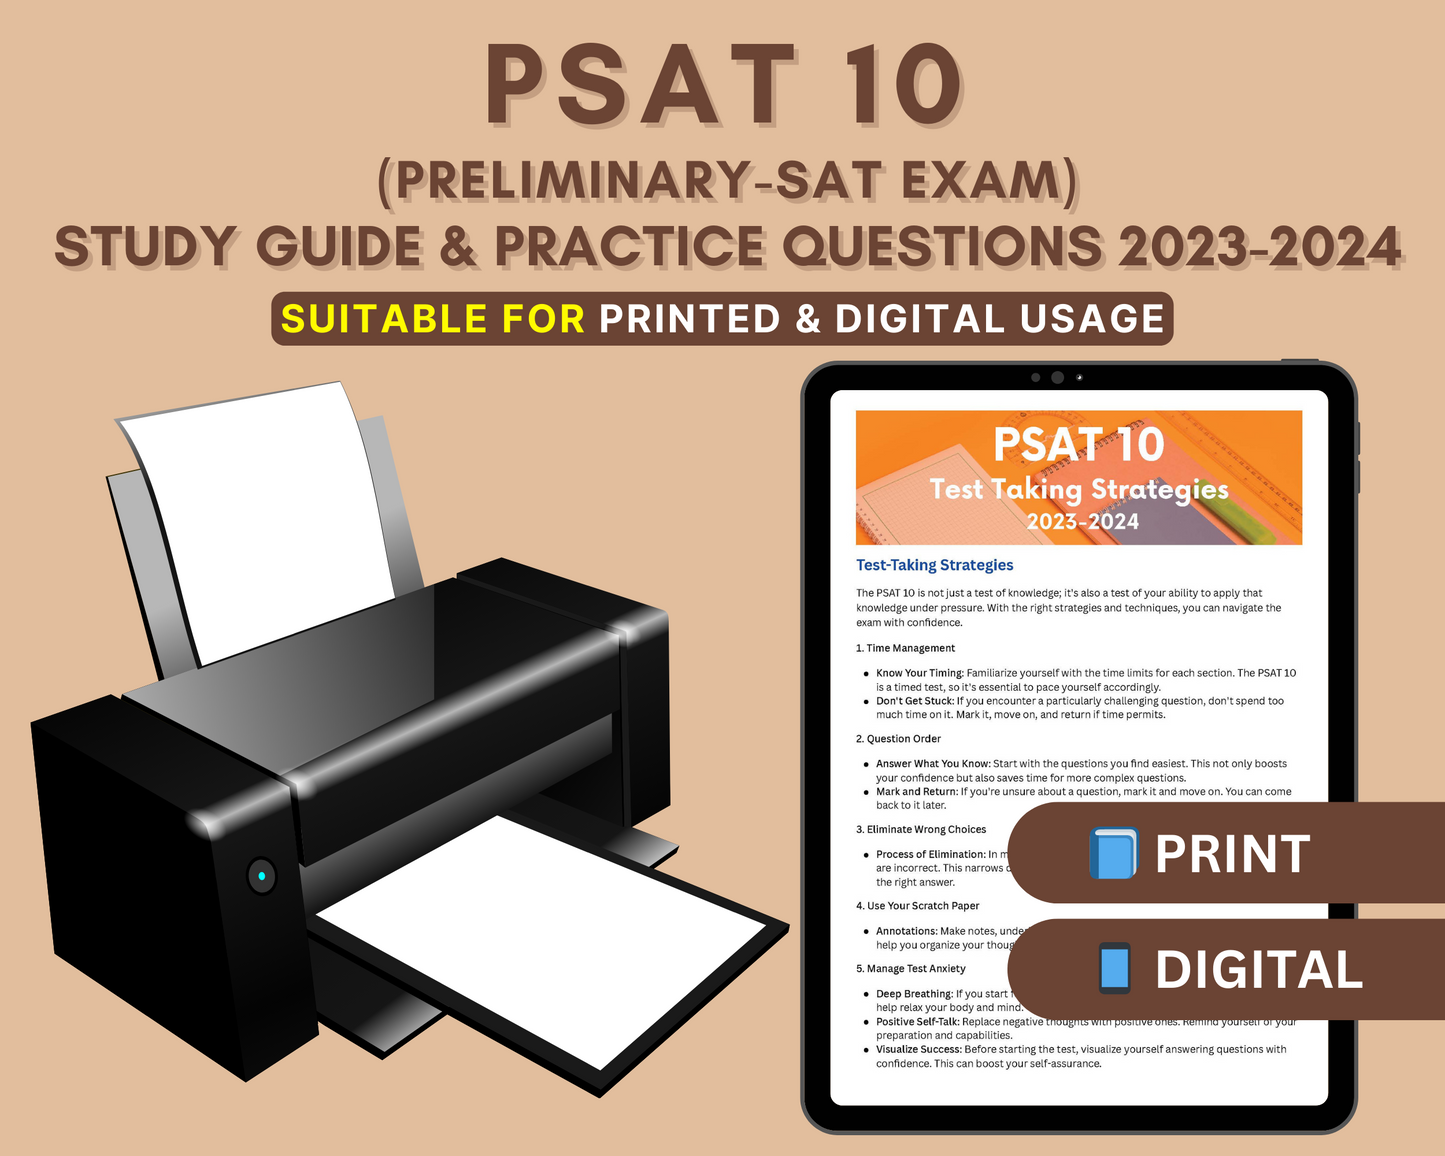 PSAT 10 Prep Book 2023-2024: Comprehensive Study Guide for Reading, Writing, & Math with Content Review, Practice Tests